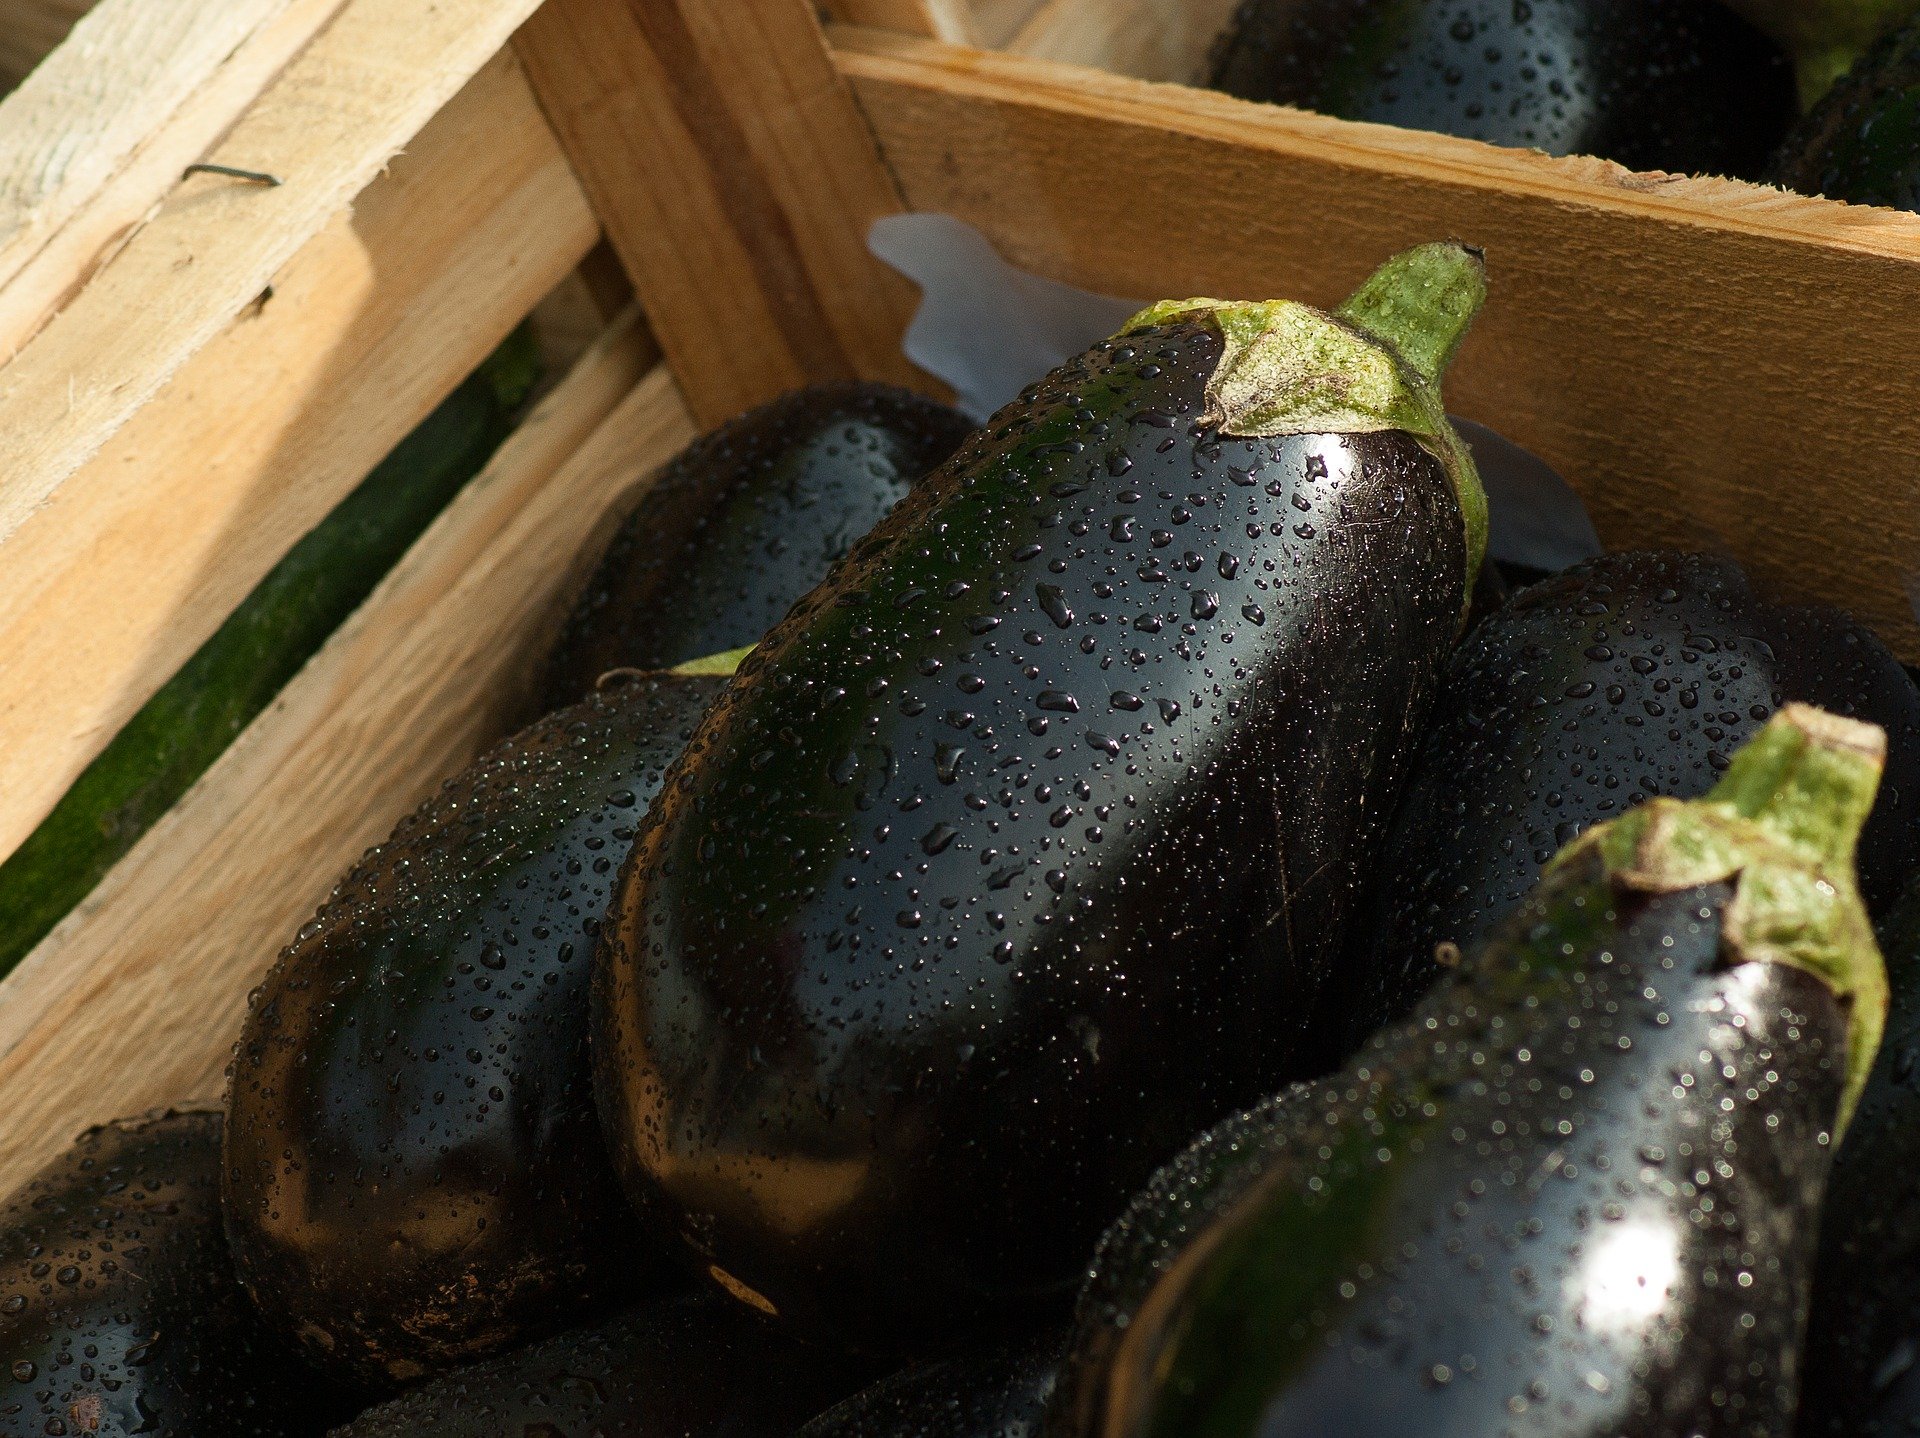 Eggplant for sale at a grocer. | Source: Pixabay.